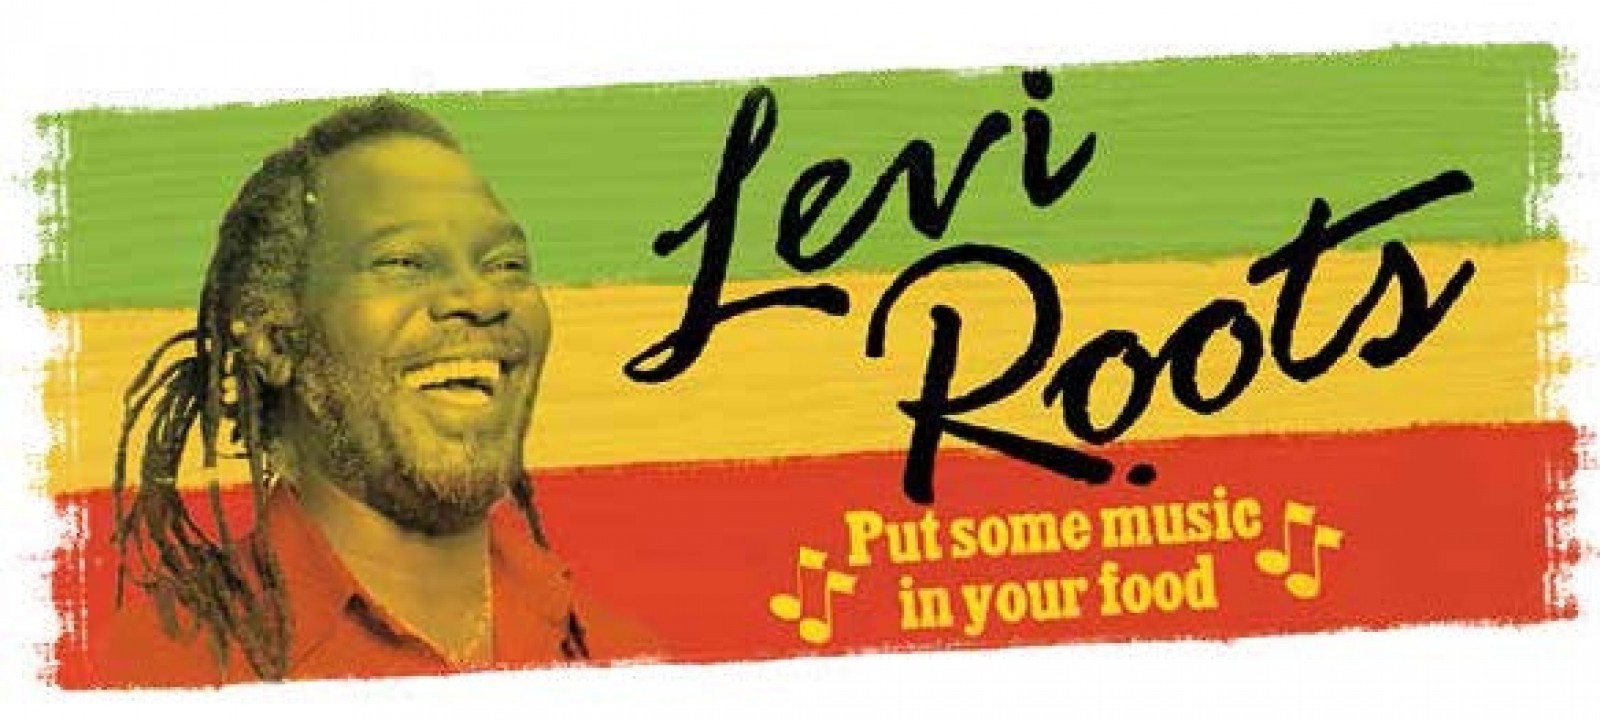 Win a Video Call With Levi Roots